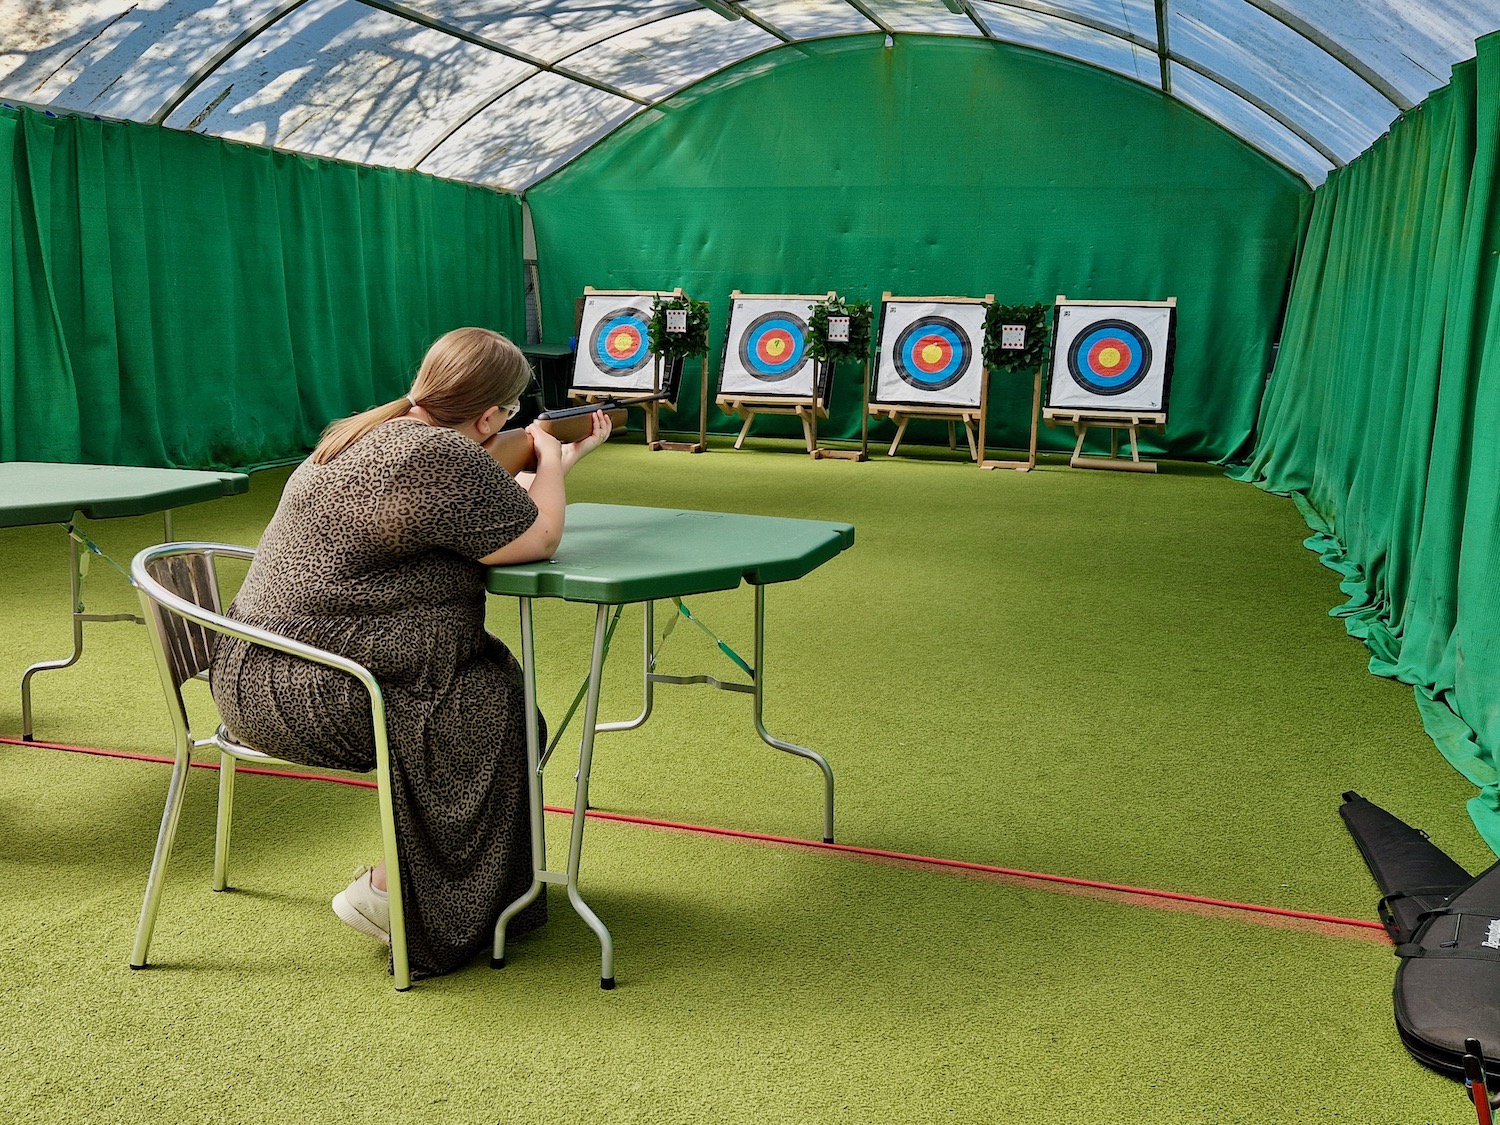 38 year old woman, wearing a brown animal print dress, taking part in a target shooting session at Haven Wild Duck